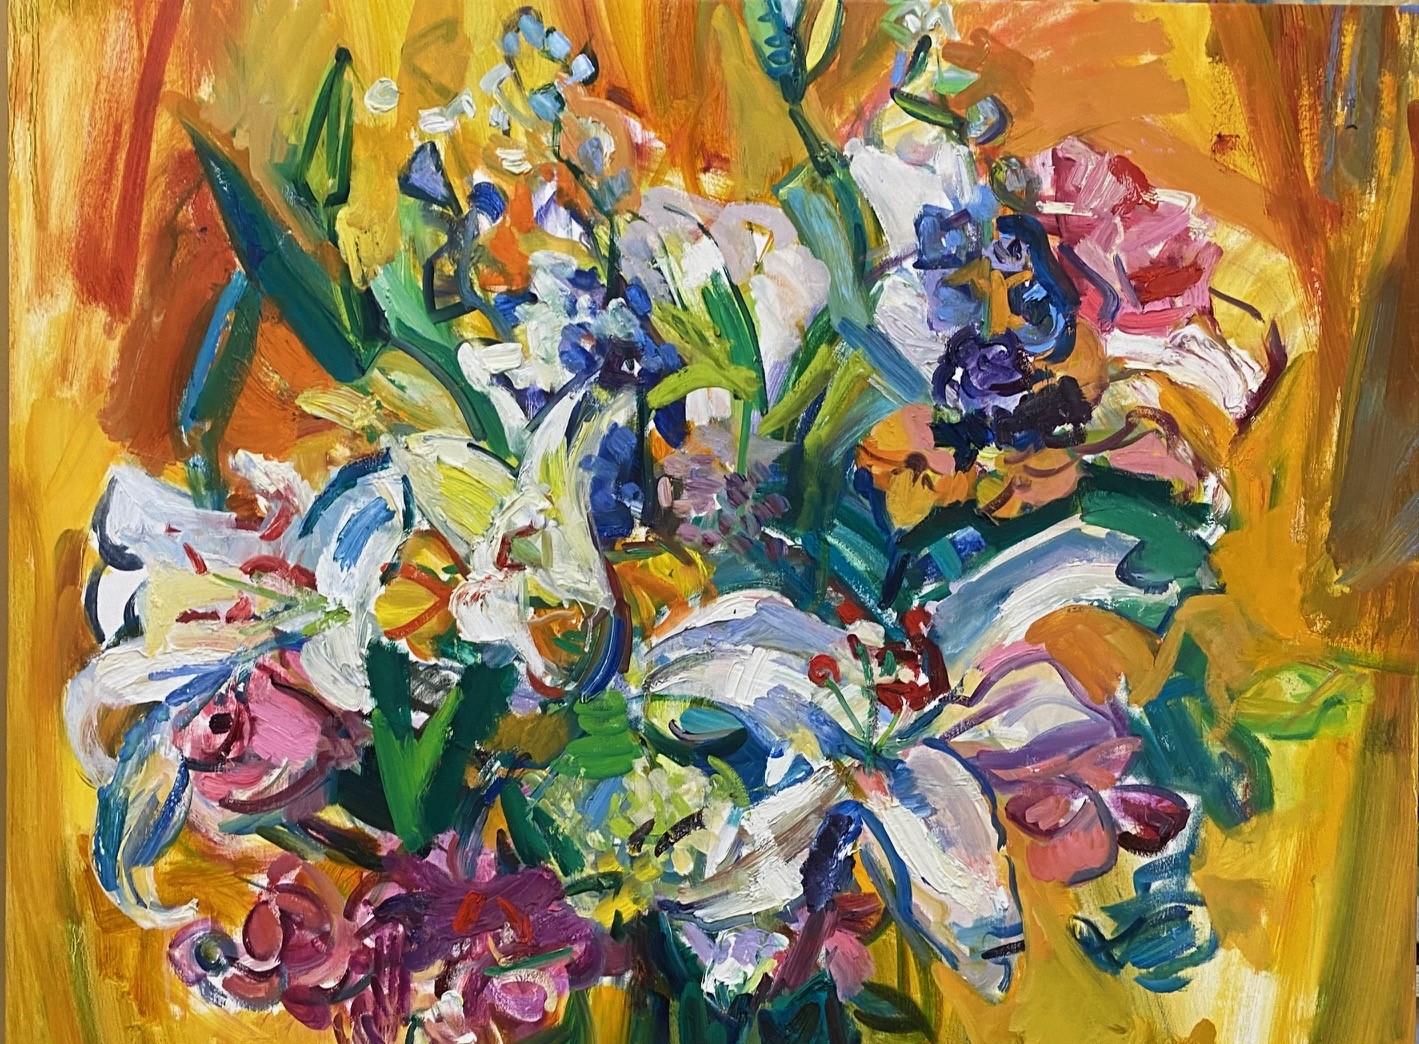 Flowers in a Vase, original 42 x 33 abstract expressionist floral still life - Painting by Sonia Grineva